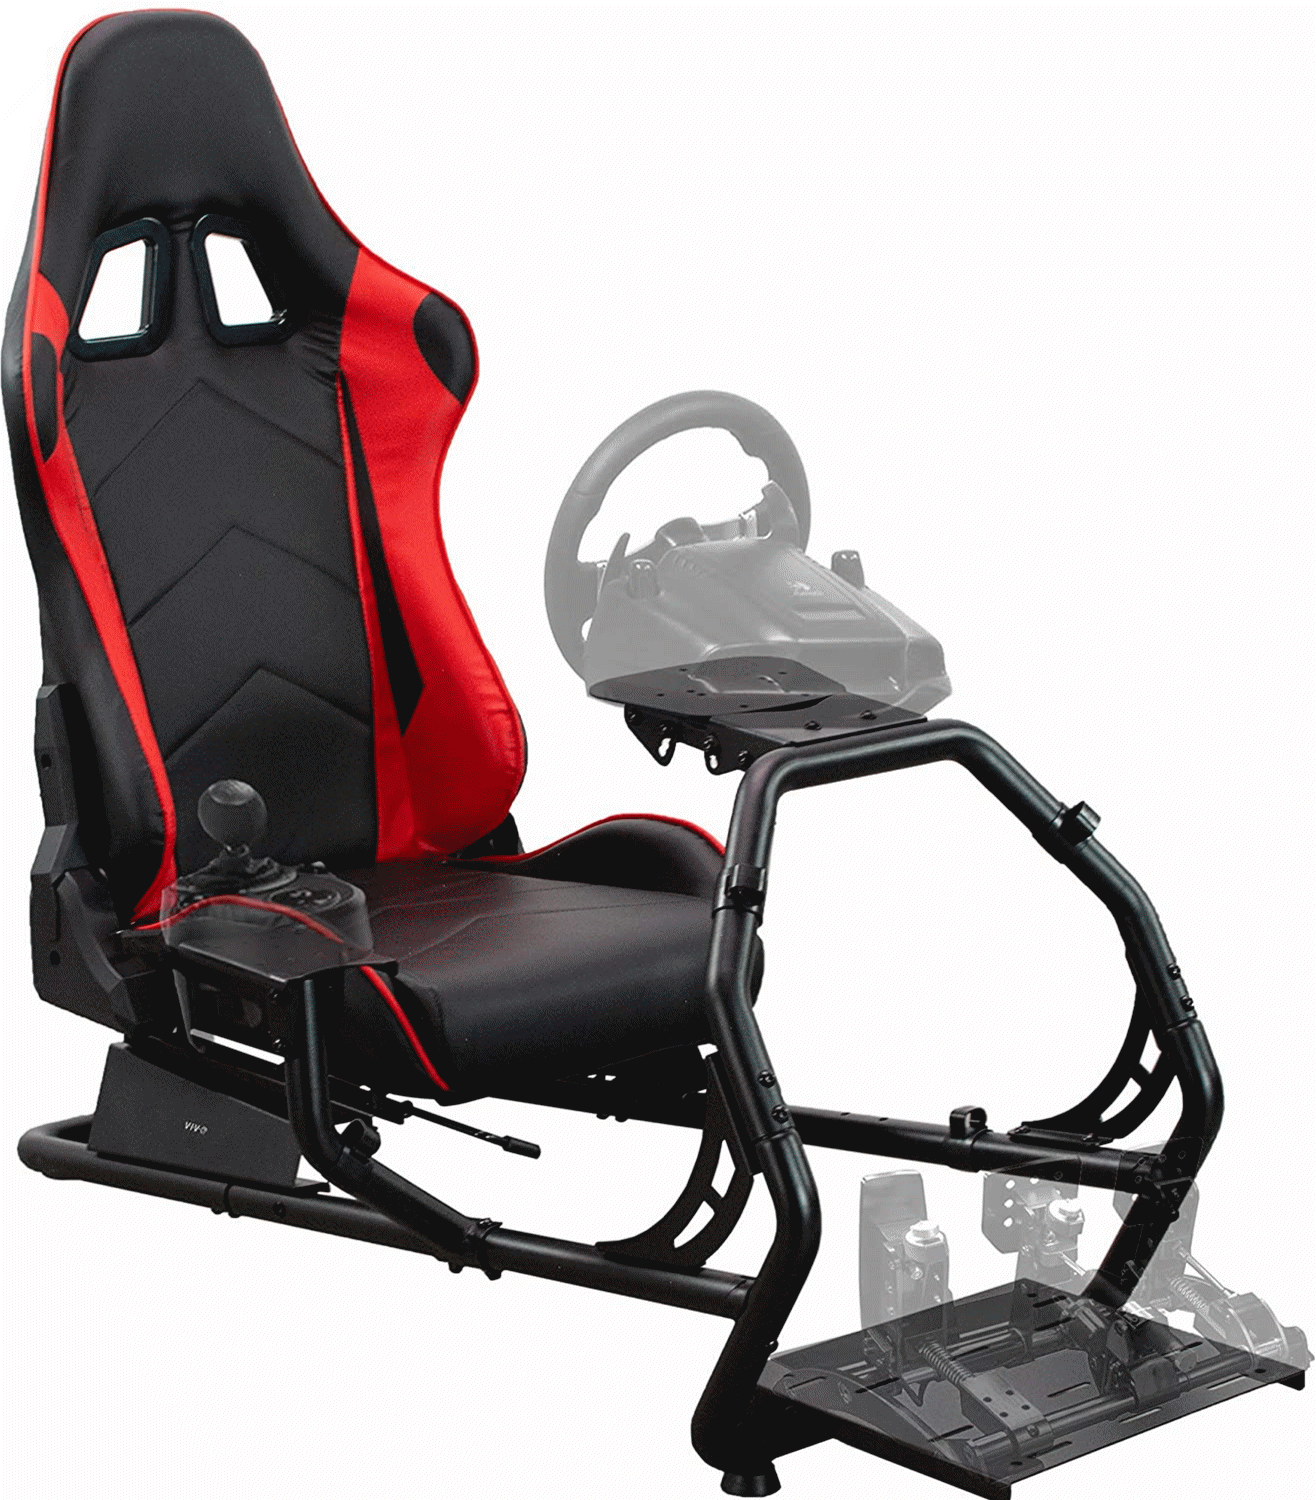 Buy 2021 New Racing Seat Gaming Chair Simulator Cockpit Steering Wheel Stand For Logitech G29 Thrustmaster Xbox Playstation Ps4 Online In Vietnam 376547497